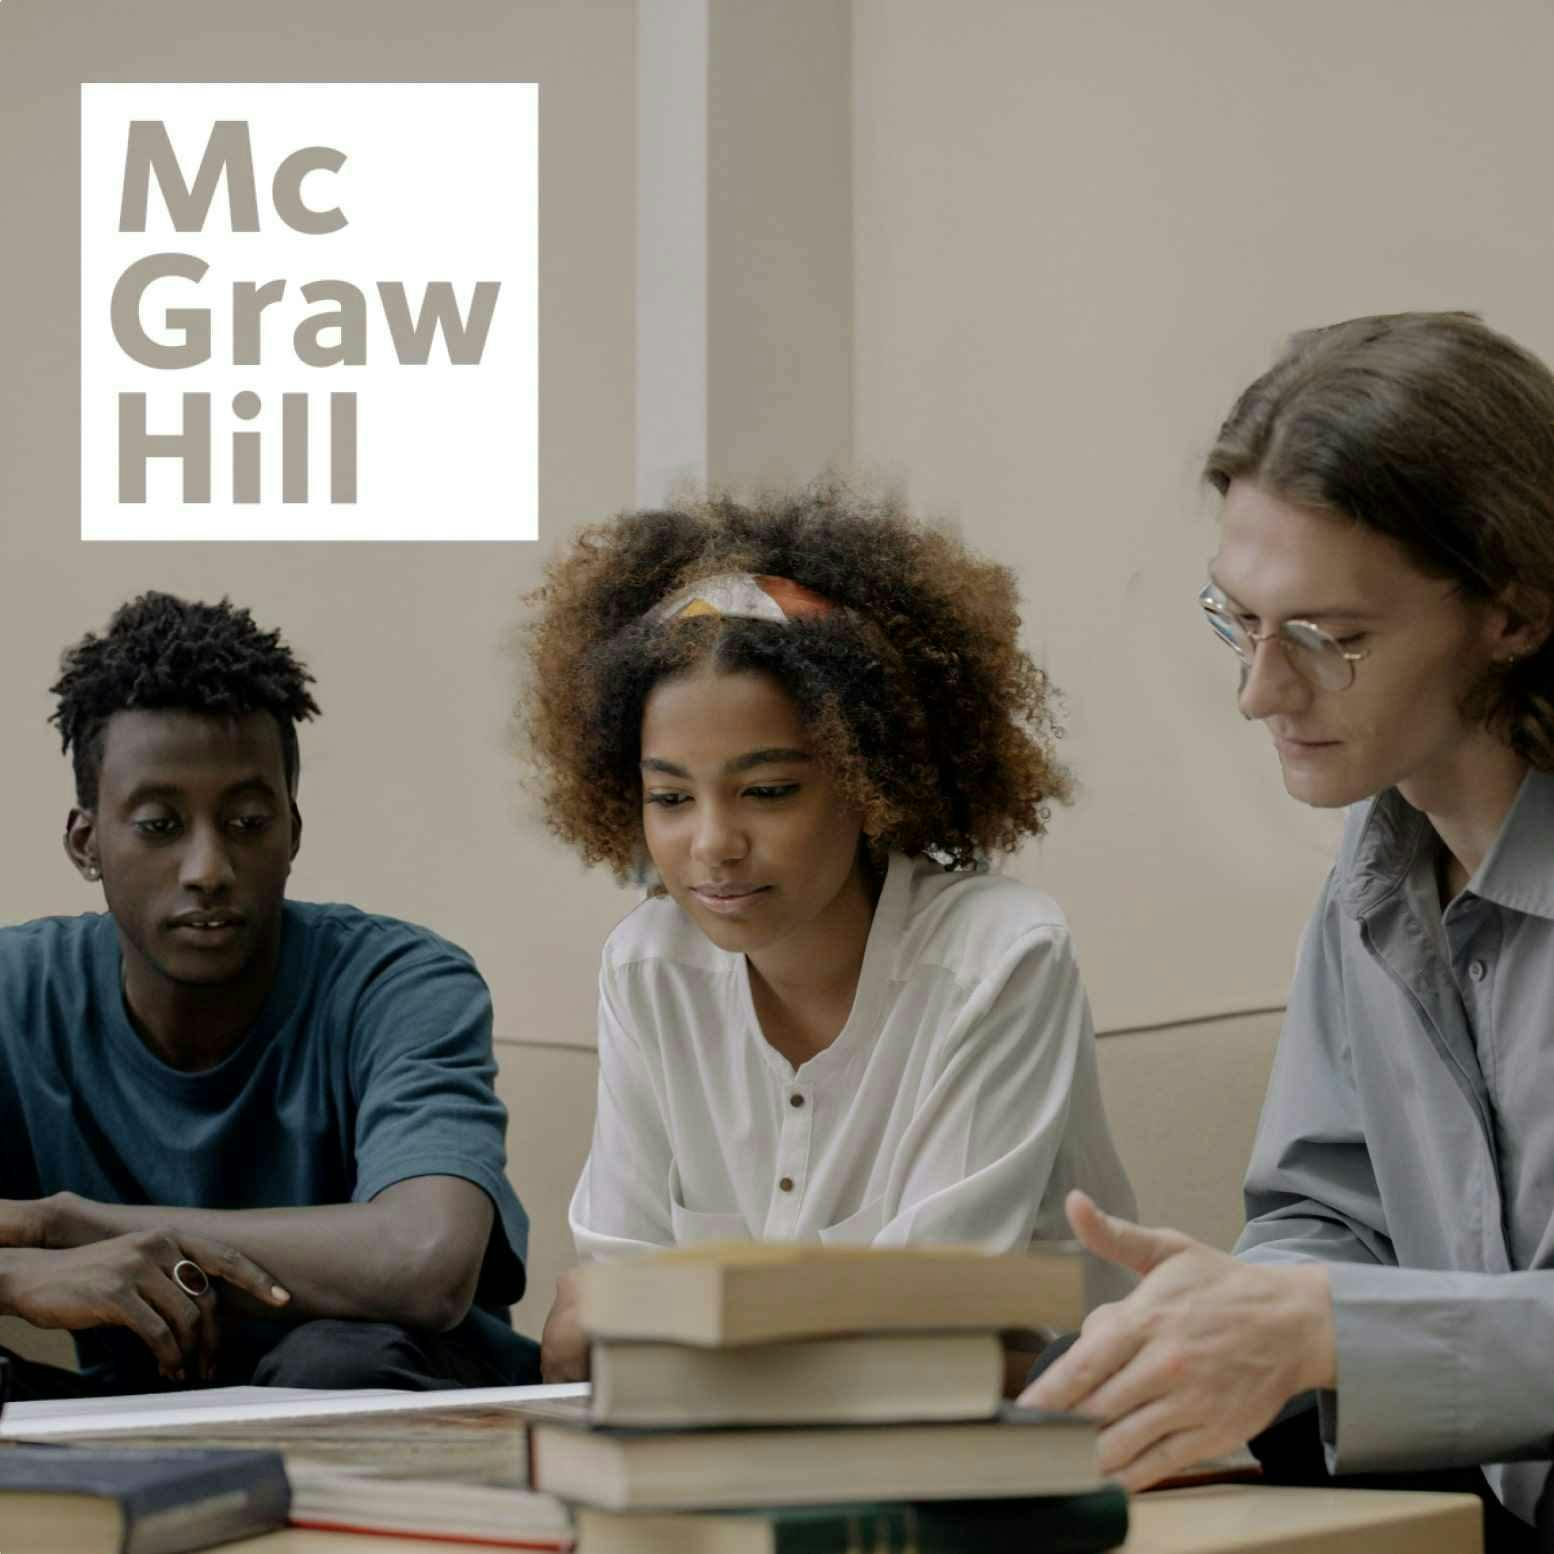 Three students all leaning over a set of books studying together with a white McGraw Hill logo in the top left corner